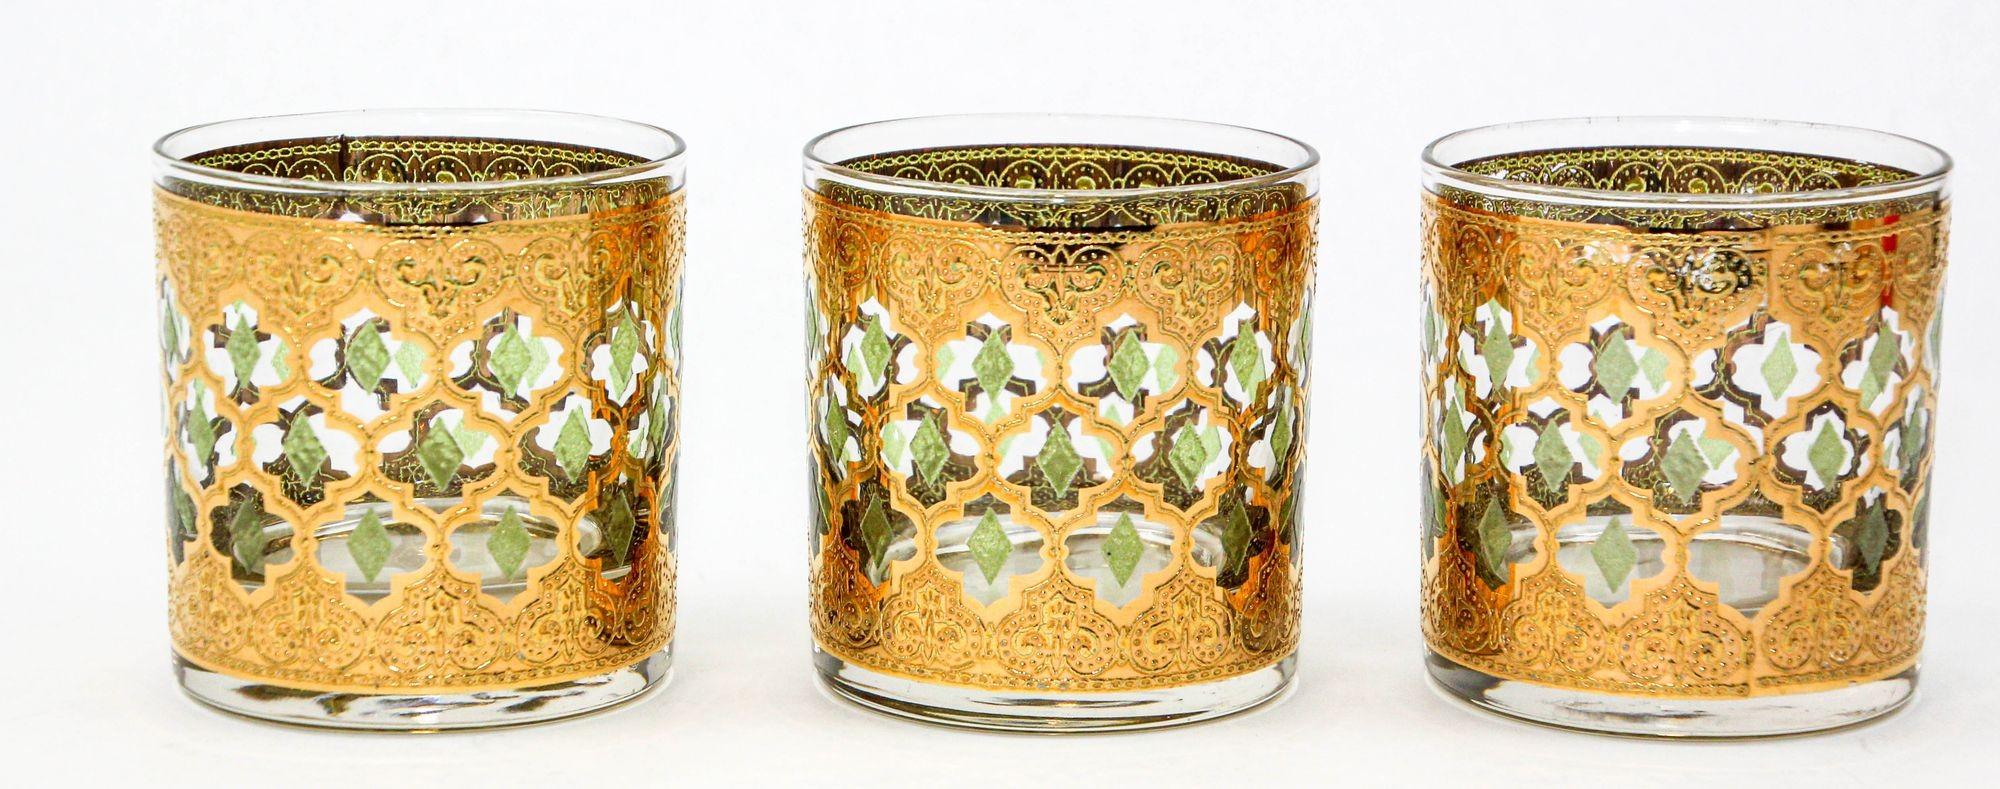 Vintage Set of 3 Old Fashioned Valencia by Culver ltd with 22-Karat Gold.
Elegant vintage mid century Culver barware double old fashion, whisky glasses with Valencia pattern in a gold leaf finish.
Set includes 3 Culver lowball glasses in Valencia